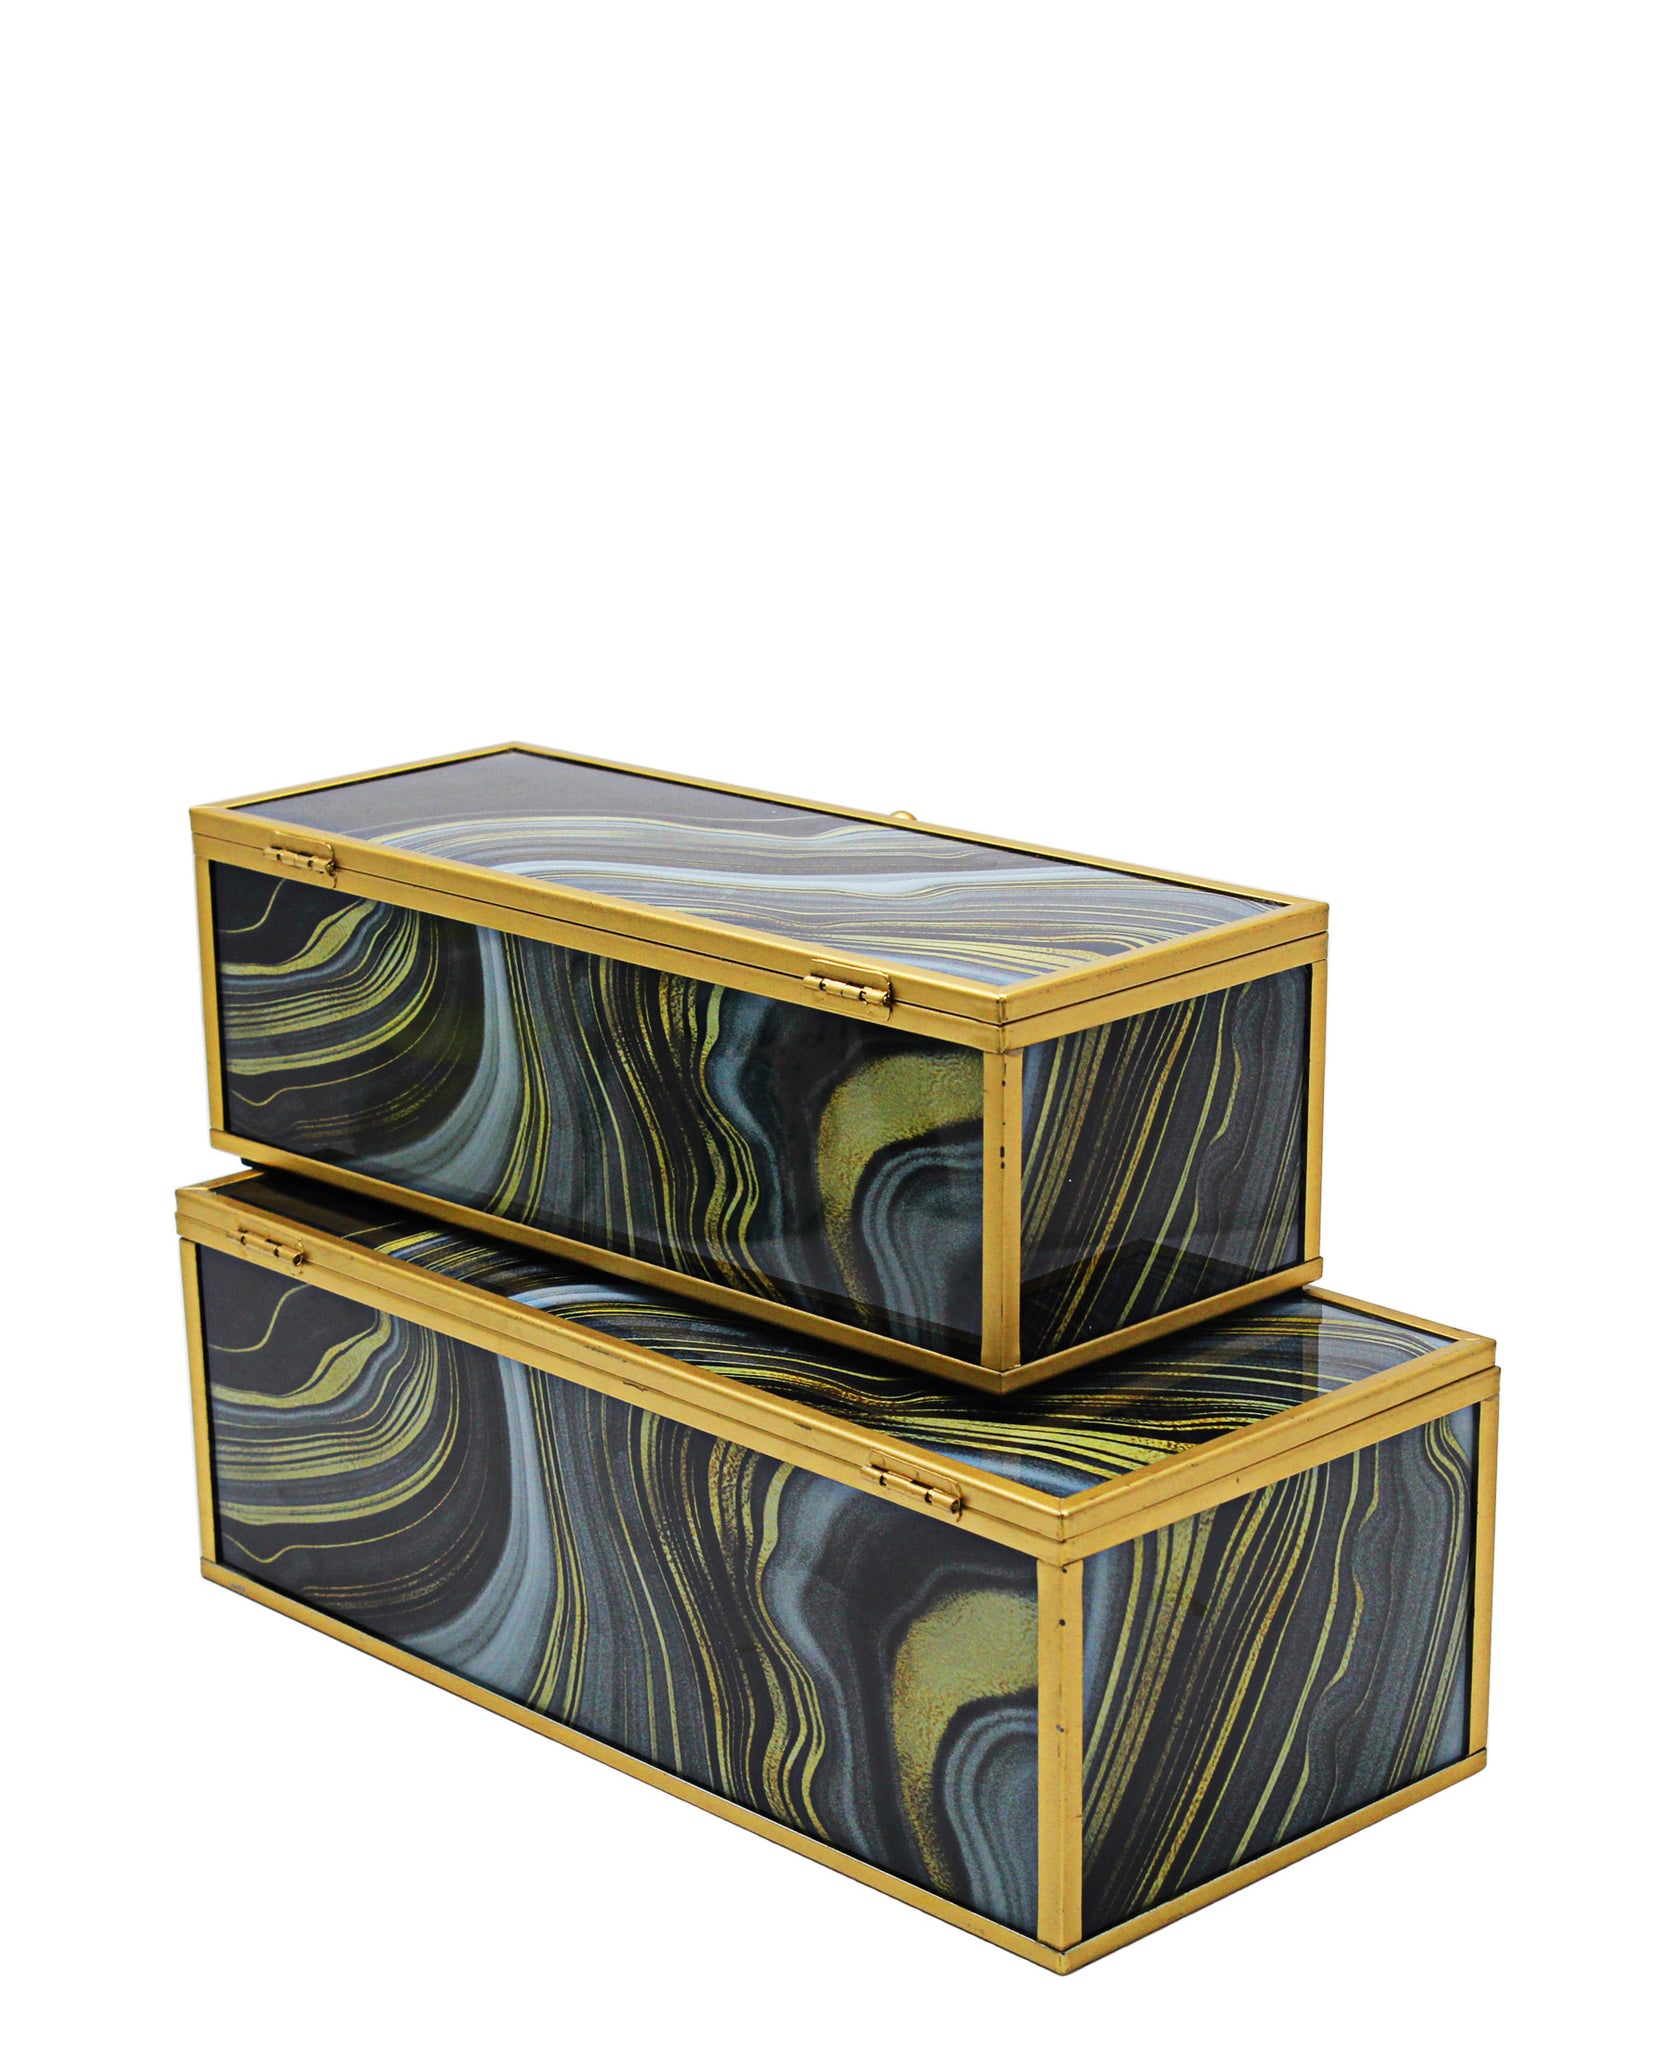 Glass Agate Wave Box With Metal Frame 2 Piece - Blue, Black & Gold